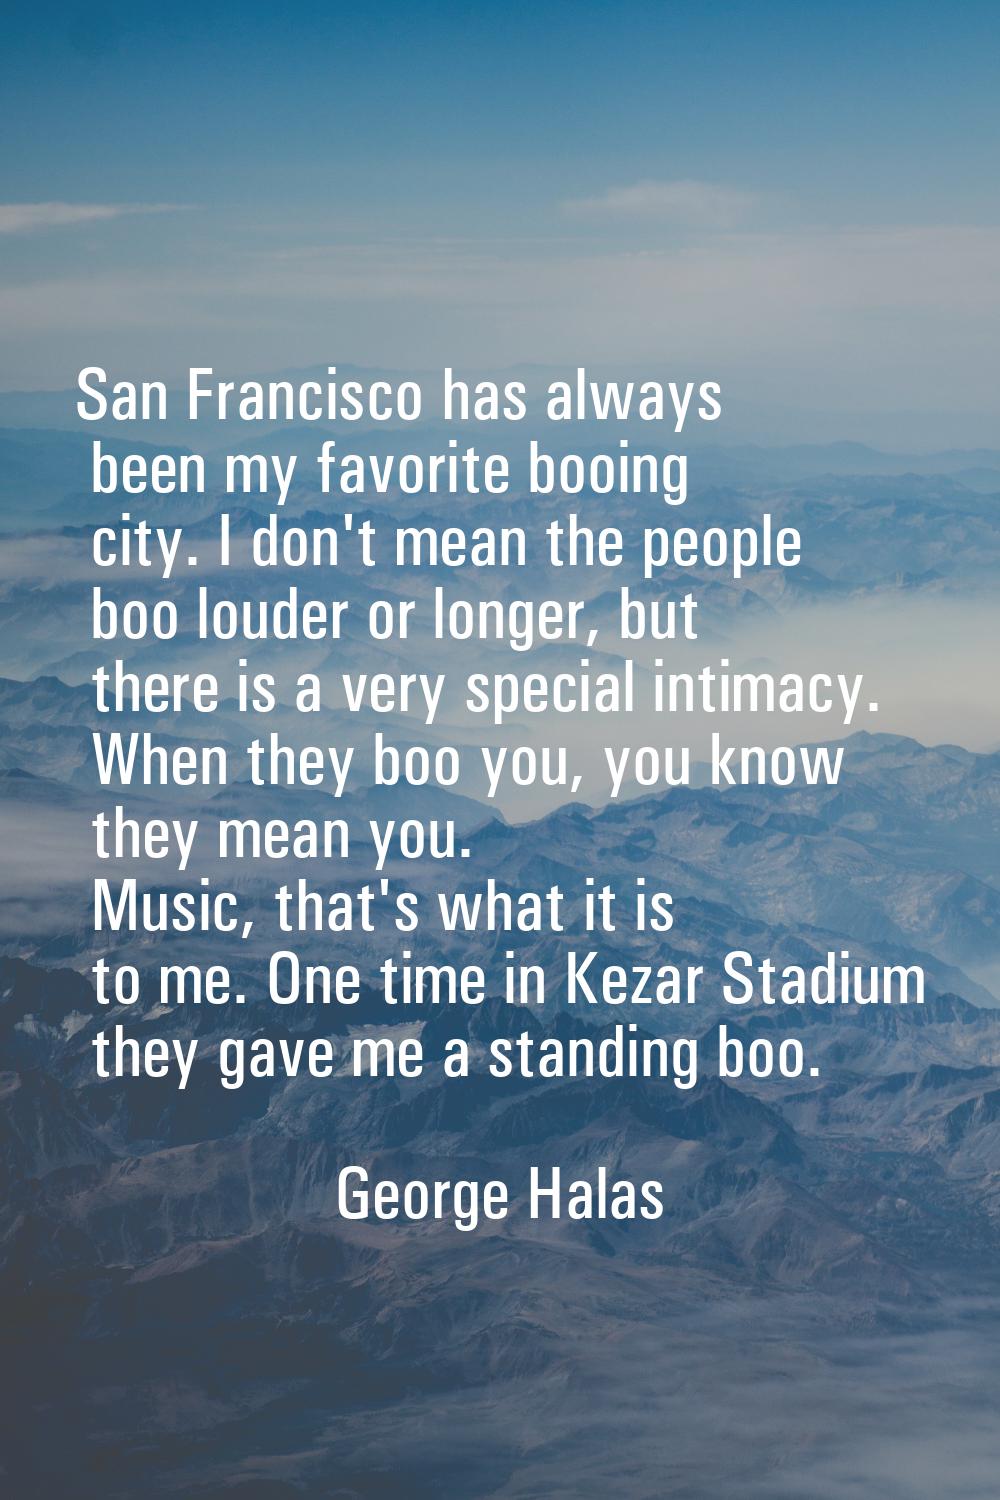 San Francisco has always been my favorite booing city. I don't mean the people boo louder or longer